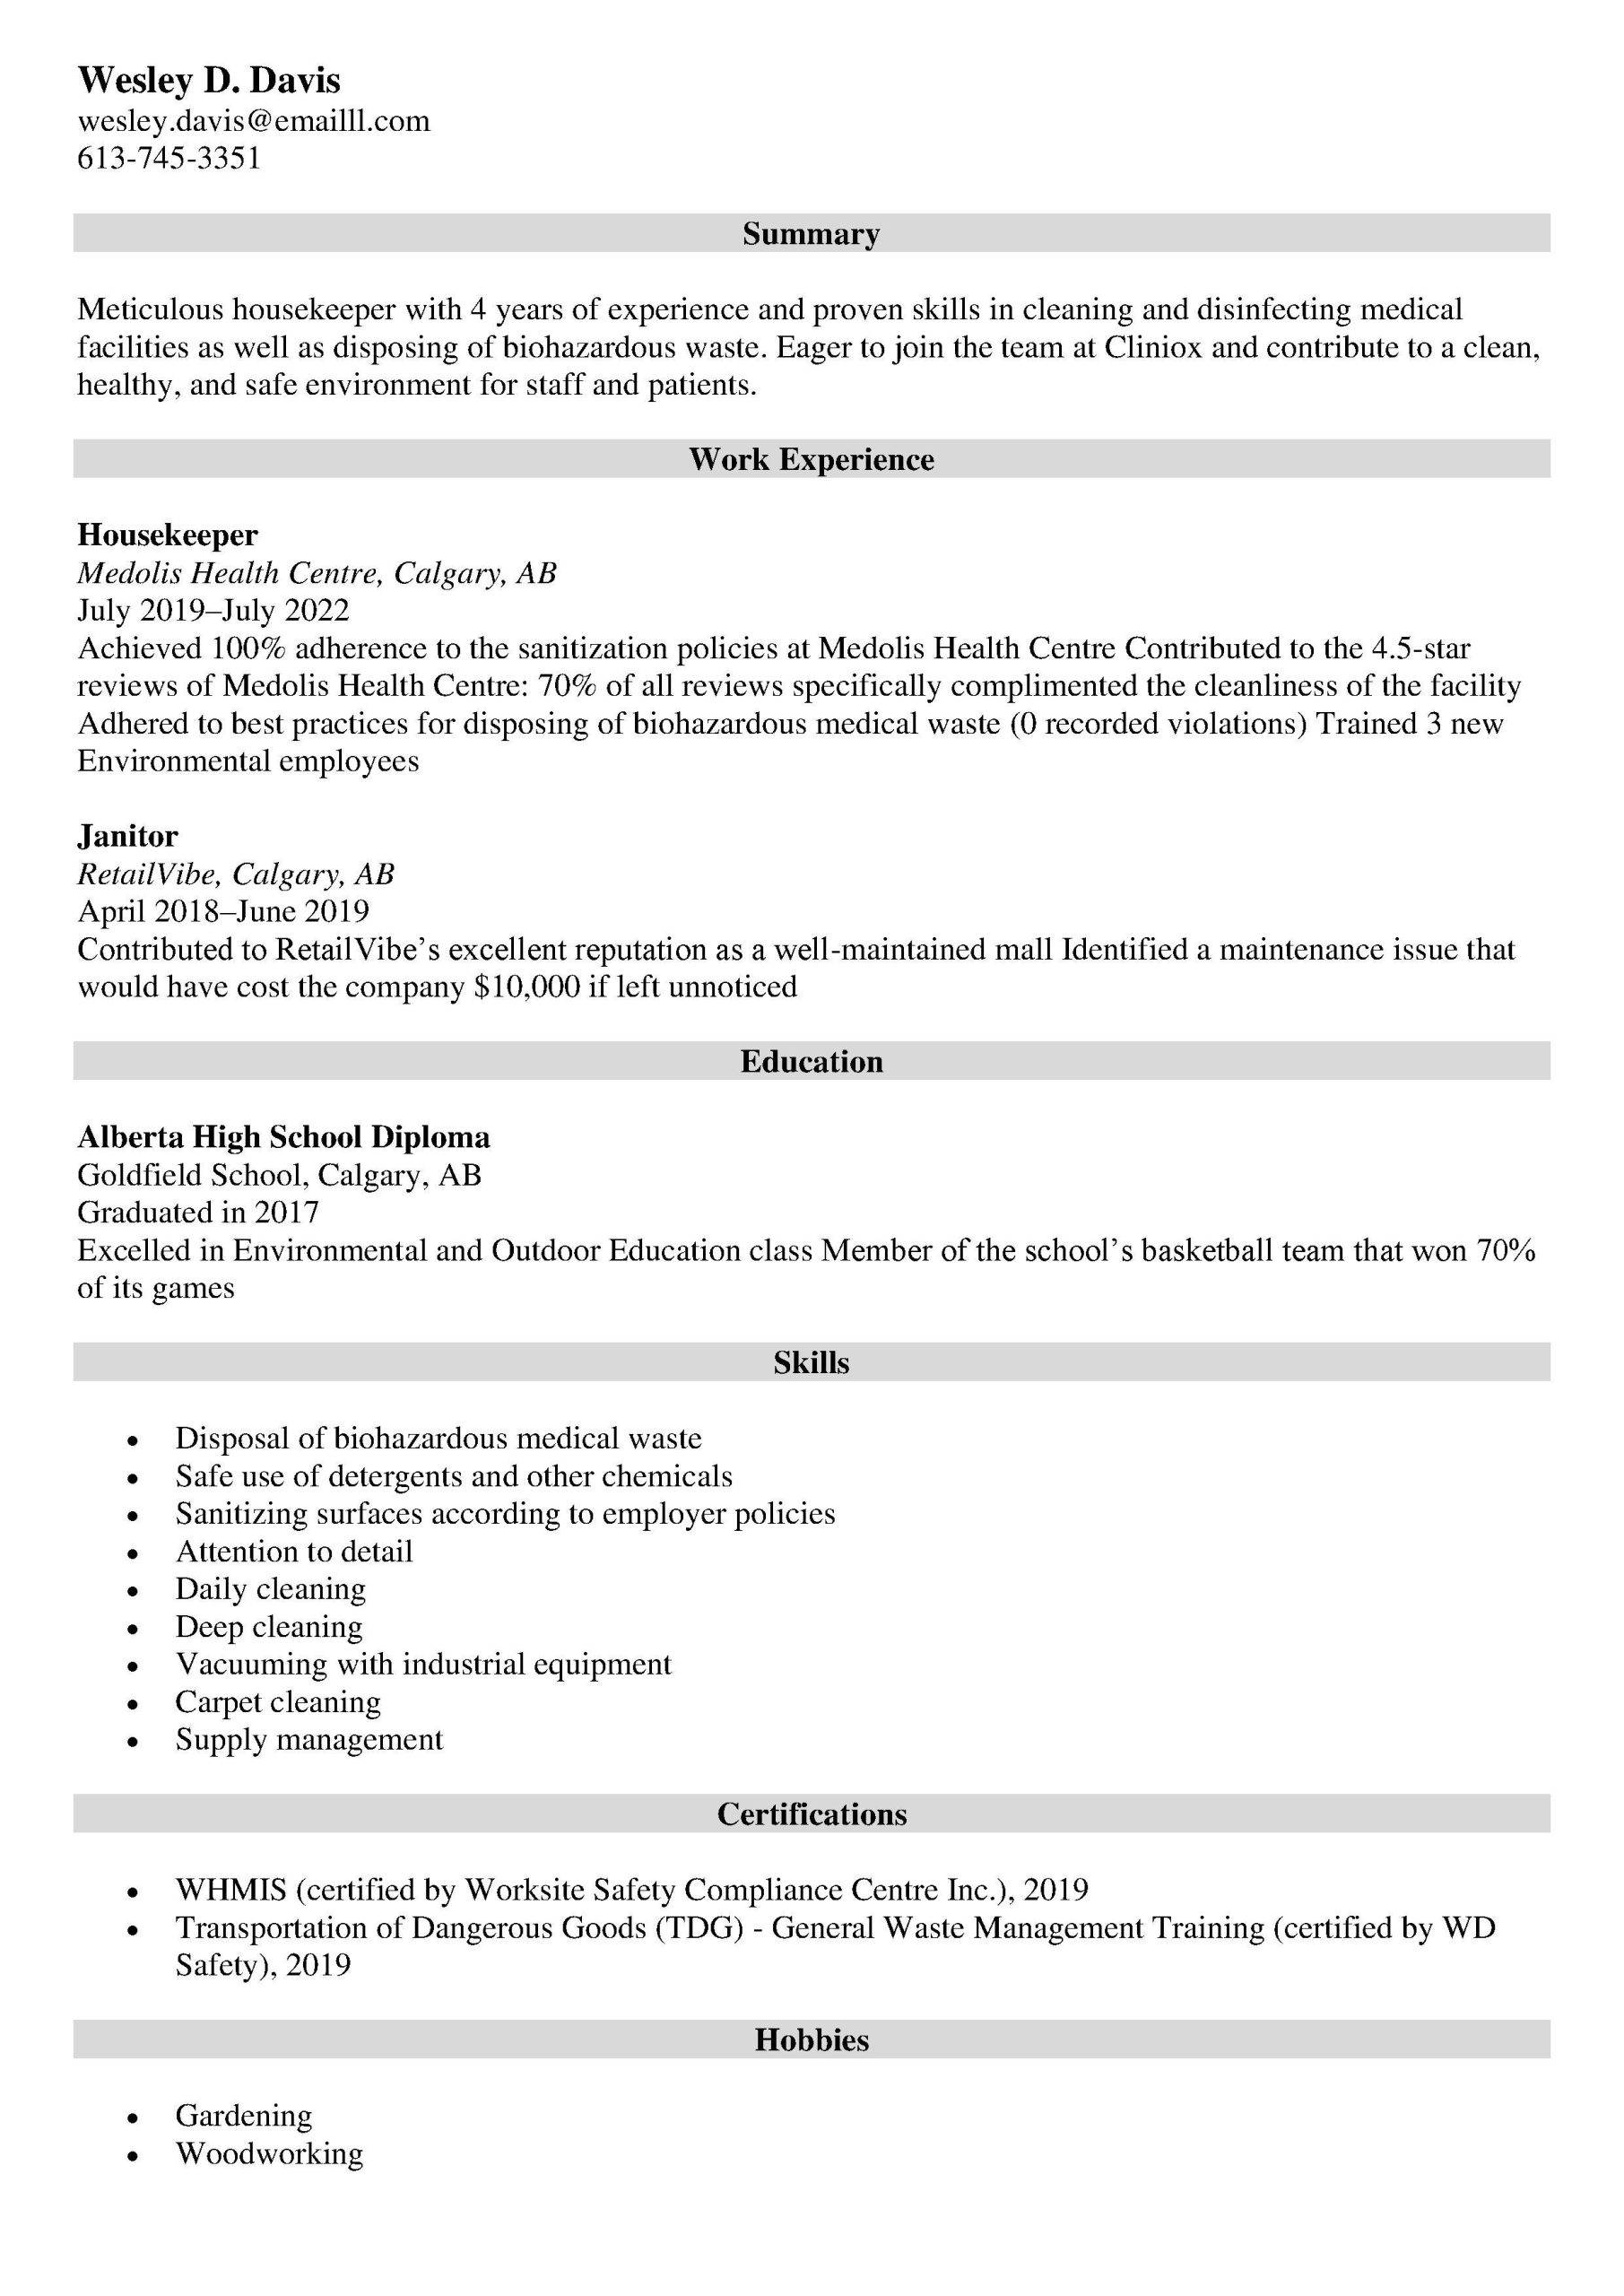 Free Sample Resume for Cleaning Service Cleaner Resume Sample: Get the Best Cleaning Jobs!